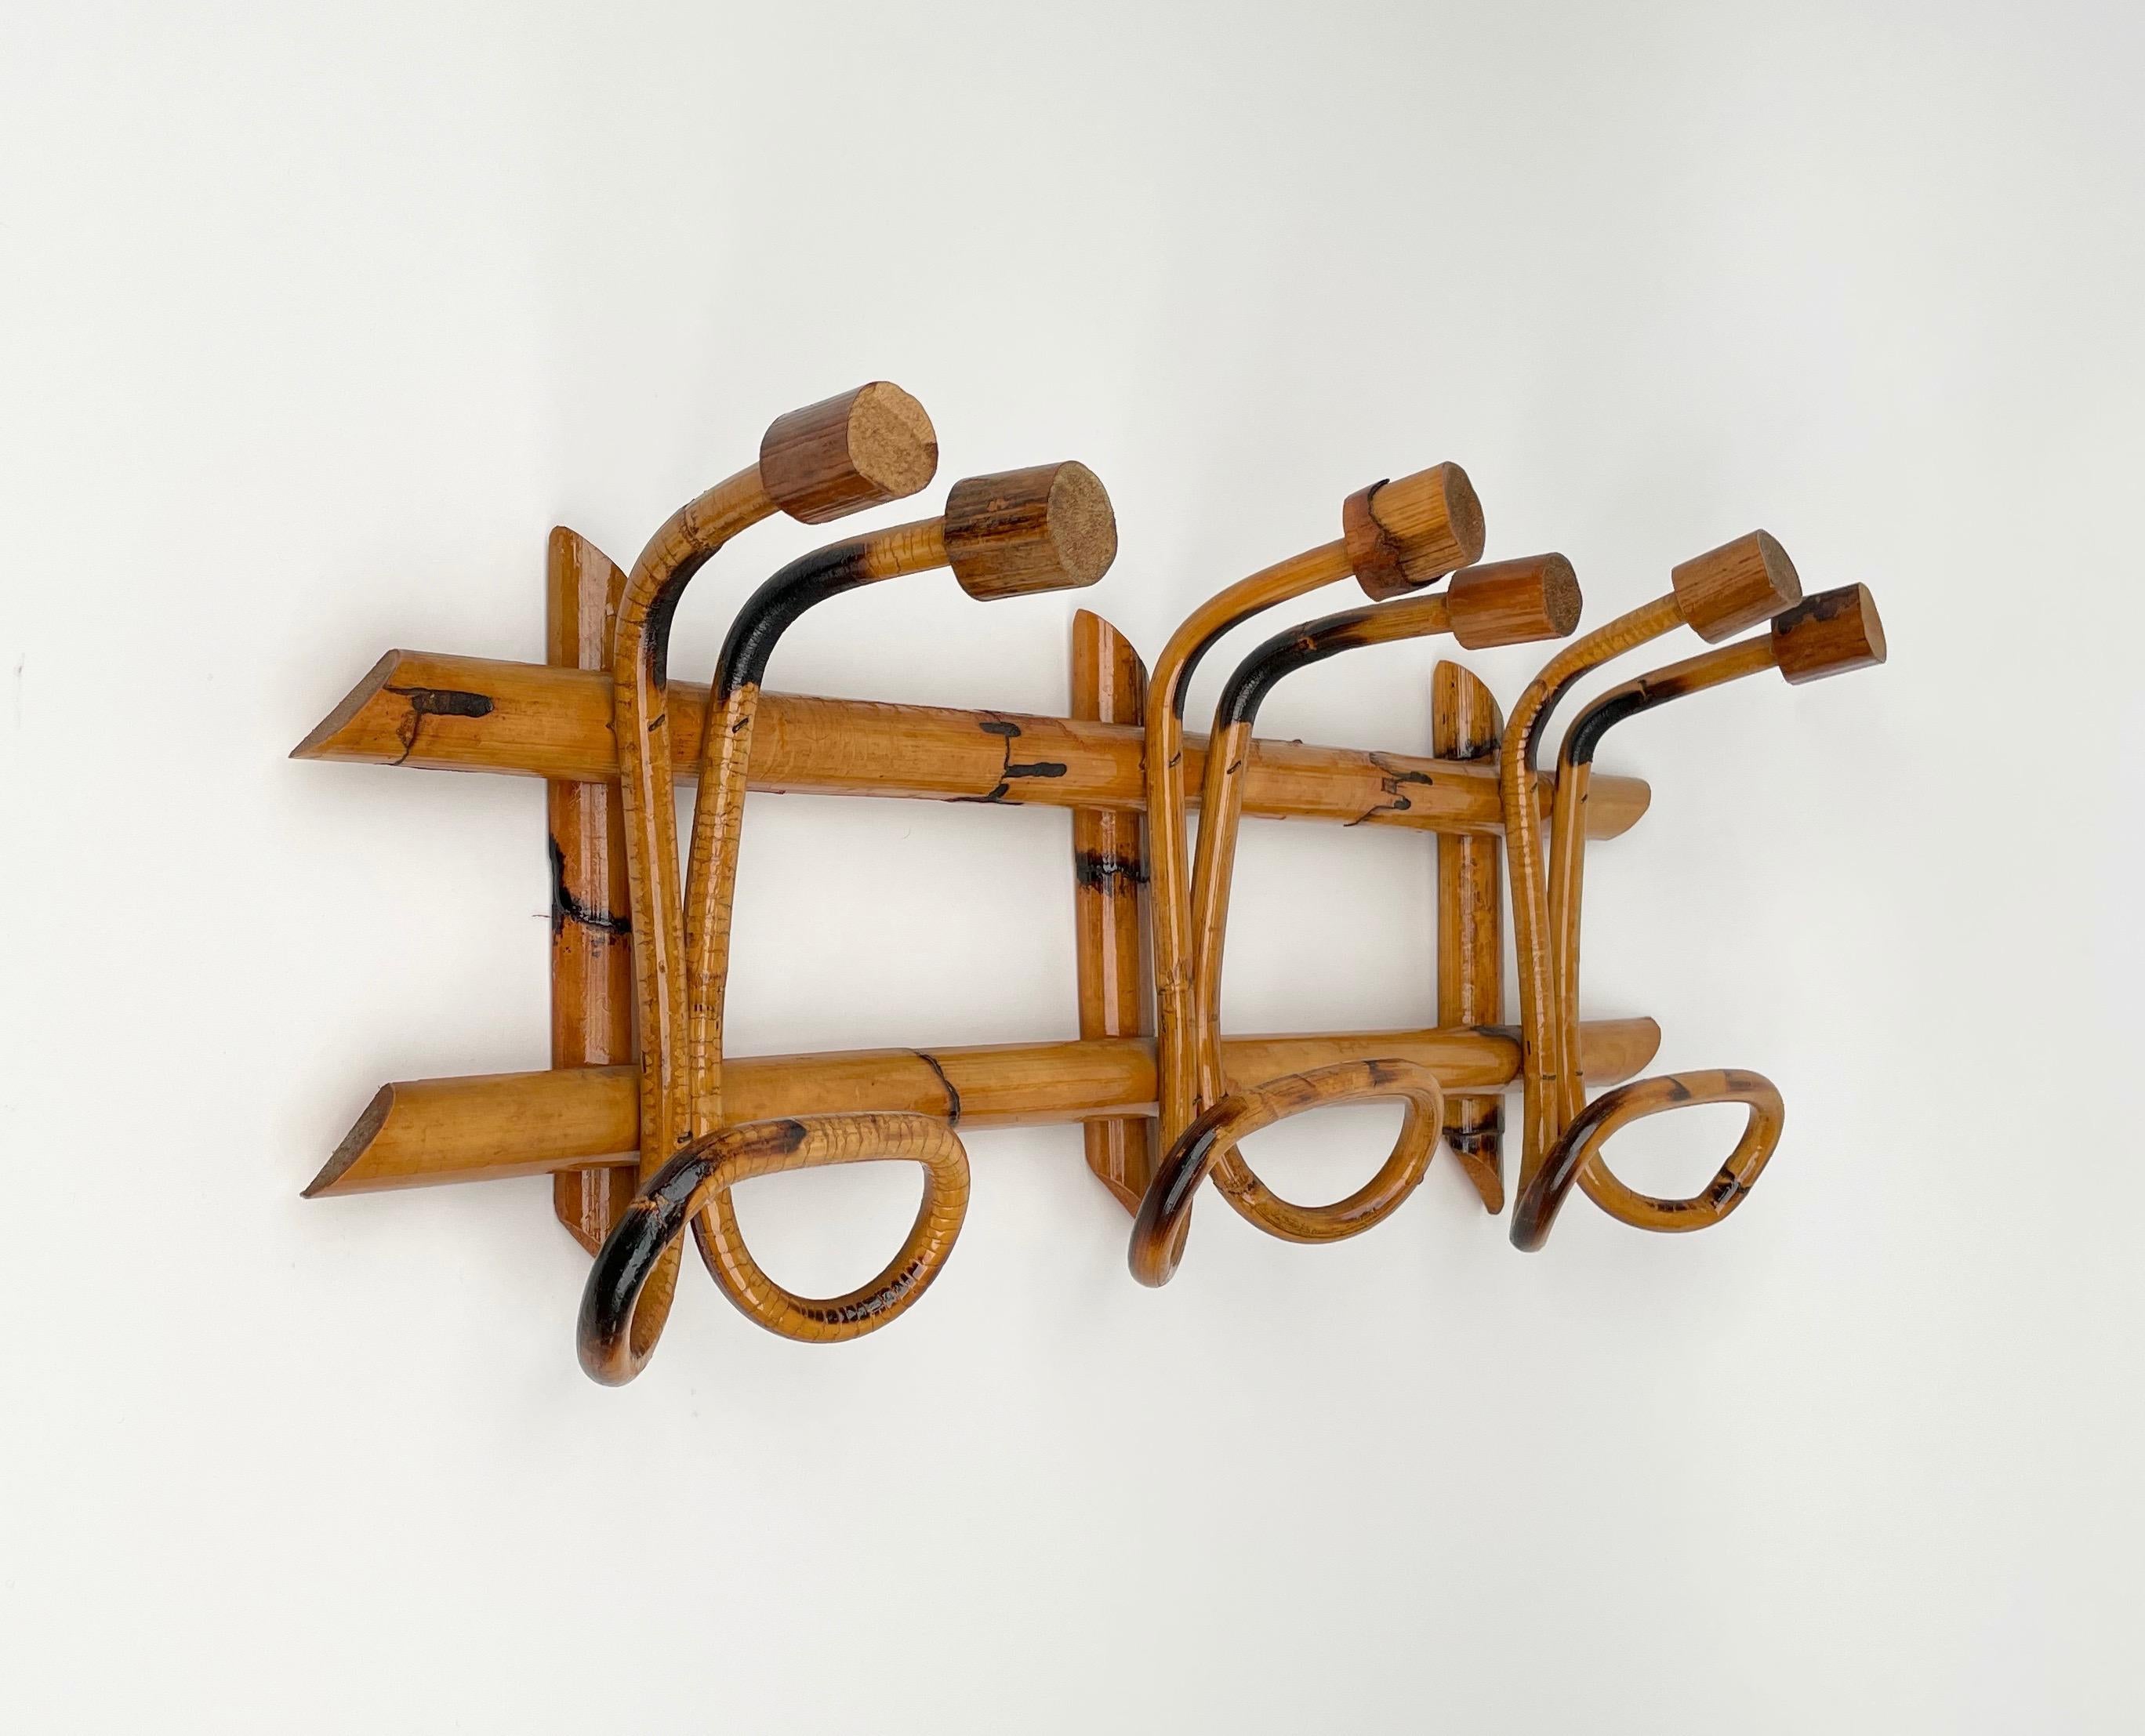 This beautiful rattan coat hanger is a French Riviera Midcentury production.

The piece was produced in Italy in 1960s and features a structure in bamboo canes and three rattan upper hooks and lower hooks for hanging clothes.

The simple